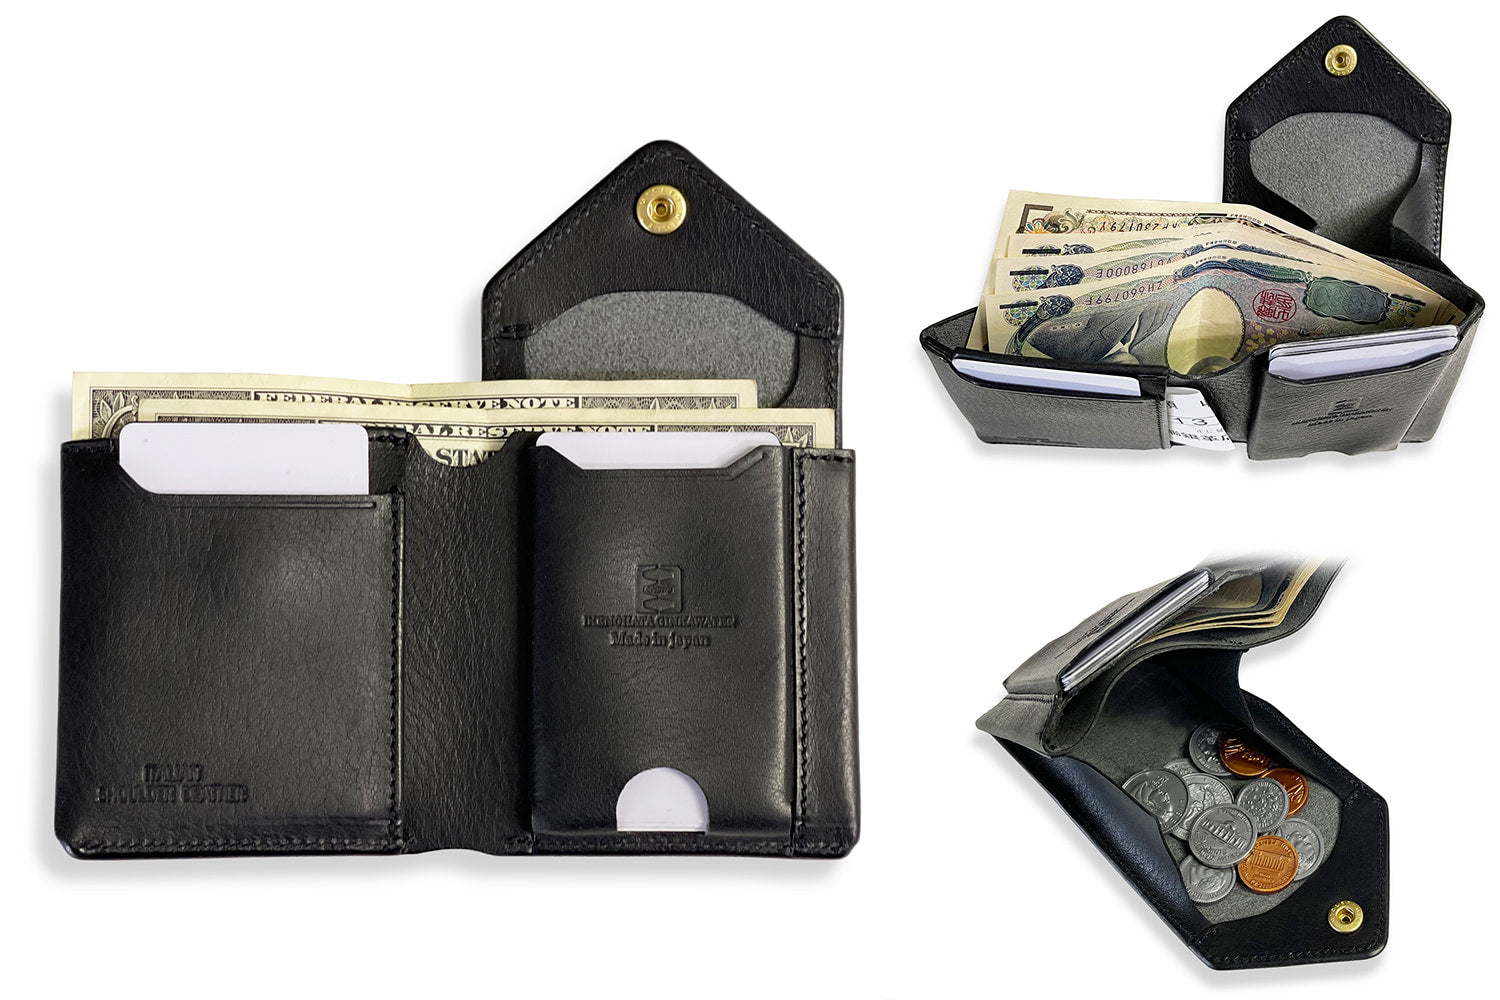 CRAMP / Ikenohata Ginzaten Expressive Italian shrink leather Garcon slim wallet with large coin case 